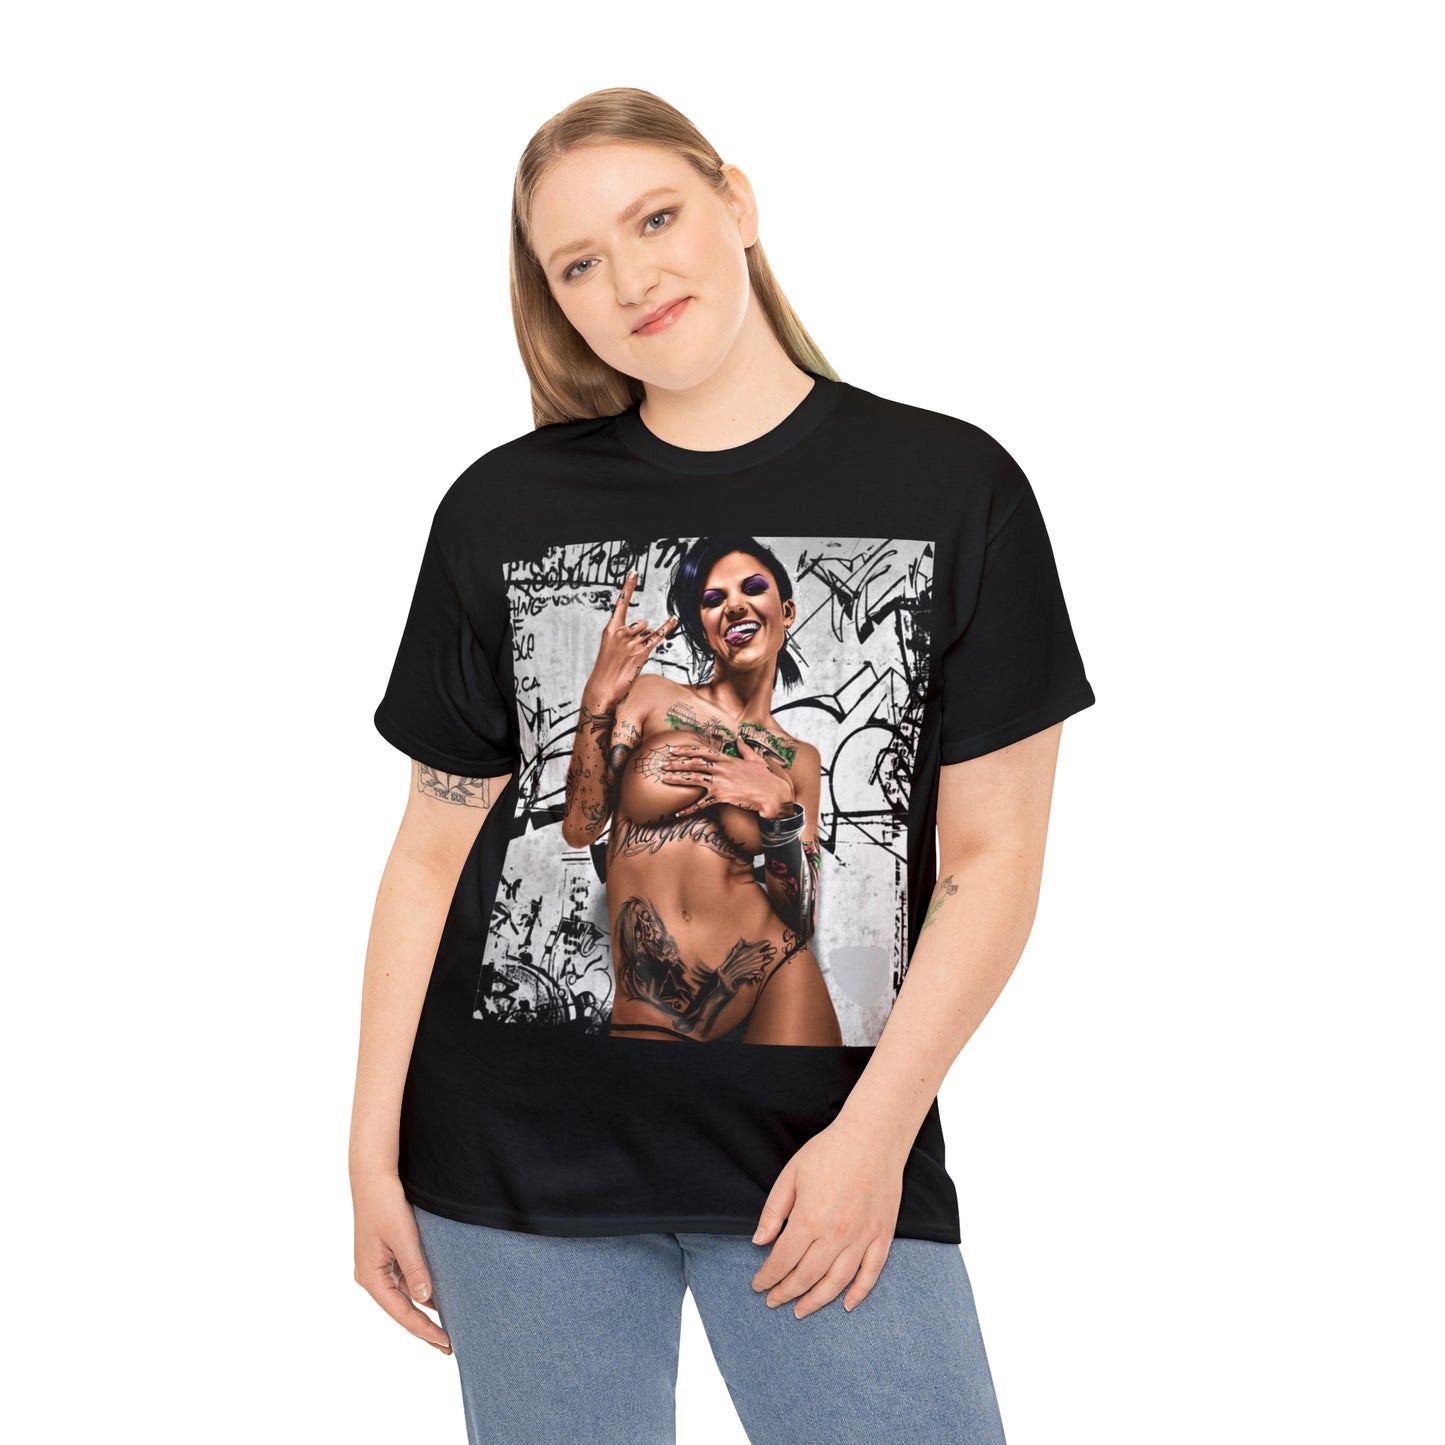 Rotten To The Core Shirt (Bonnie Rotten)